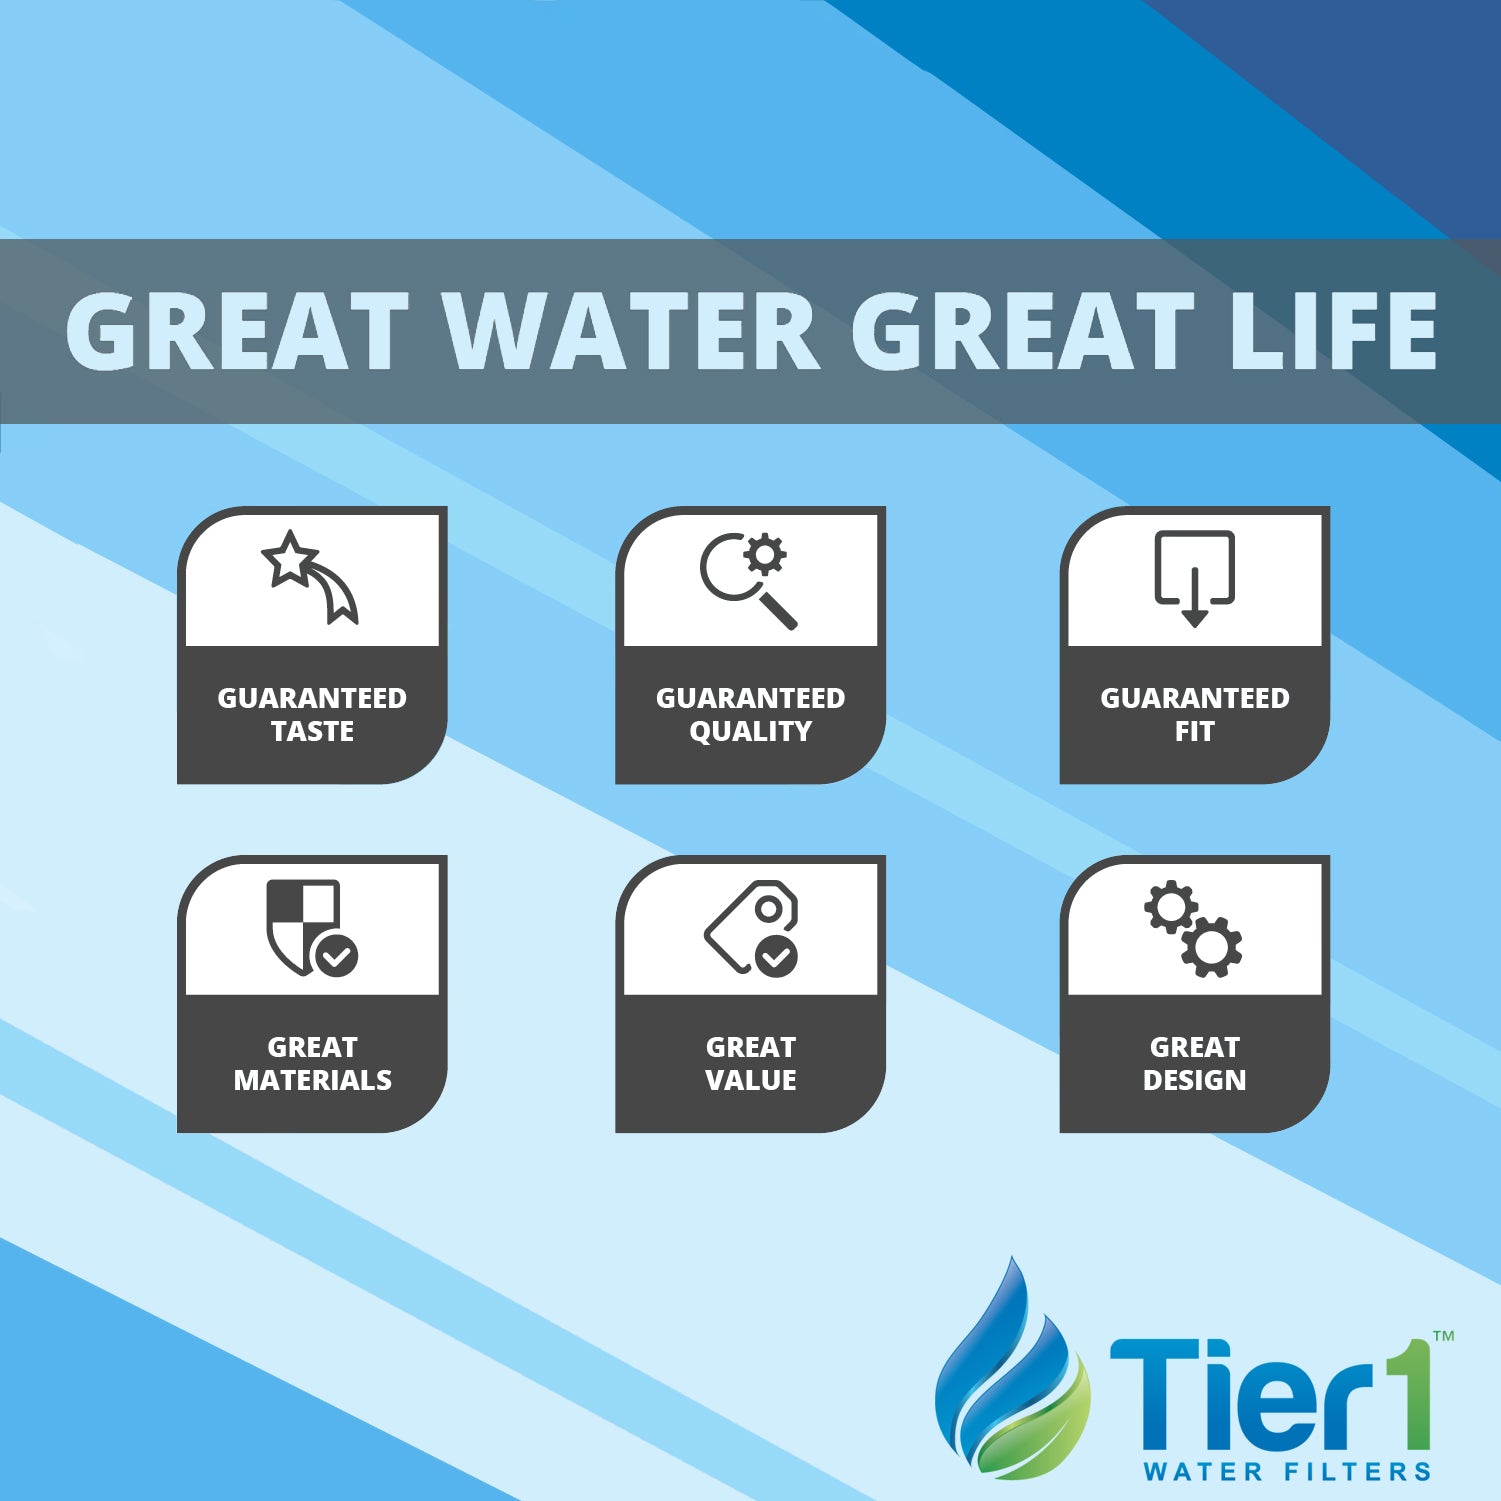 Iron and Manganese Reducing Tier1 Replacement Water Filter (Great Water Great Life)